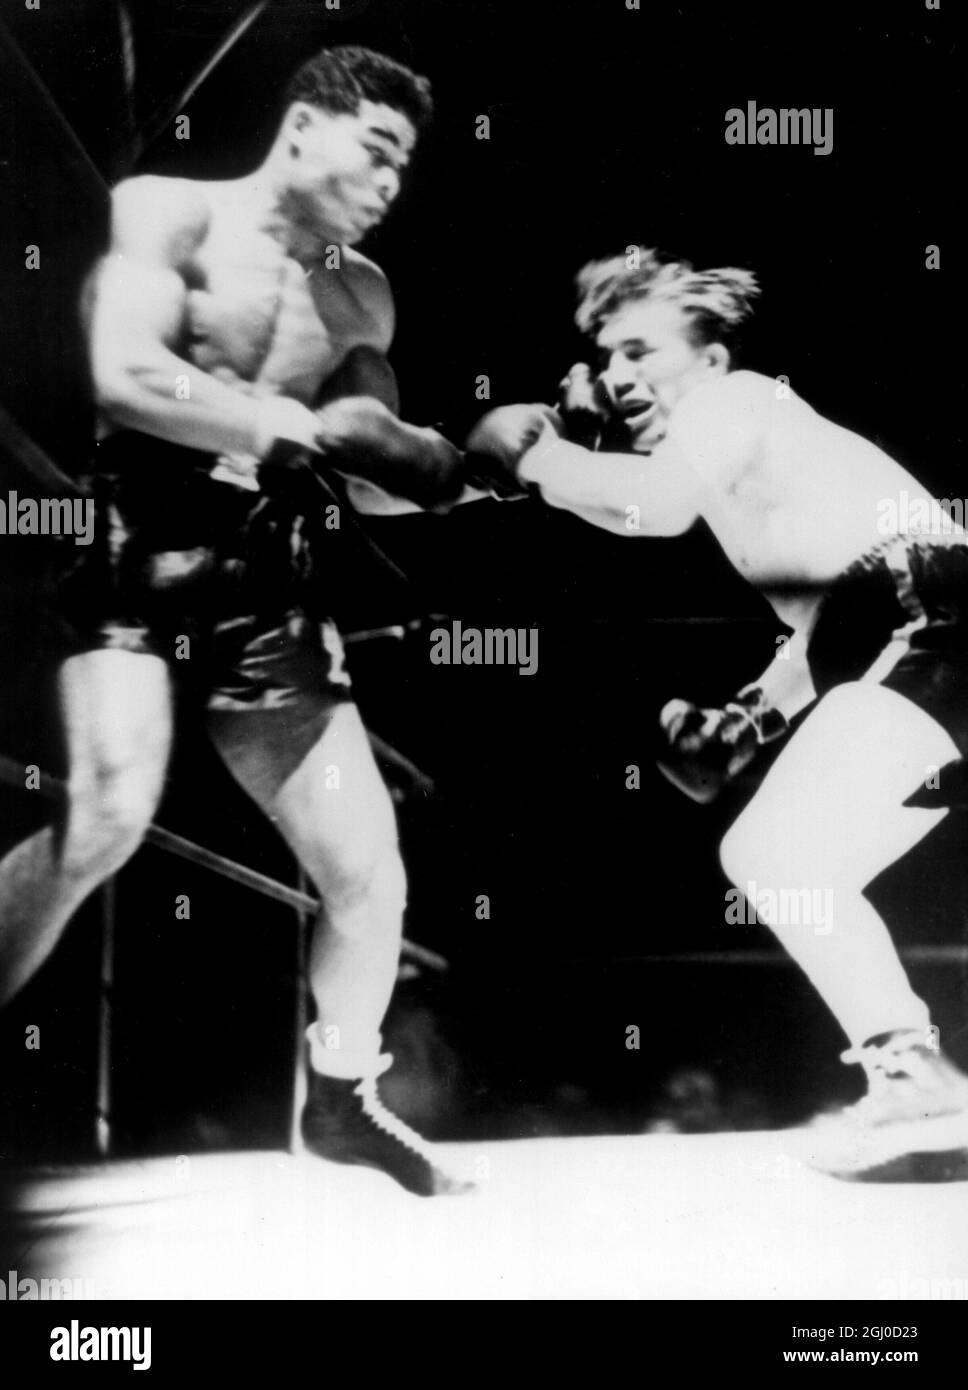 Joe Louis striking a punch to Tommy Farr during the 15th round of their epic heavyweight title fight in New York in which Joe Louis was victorious. 30th August 1937 Stock Photo